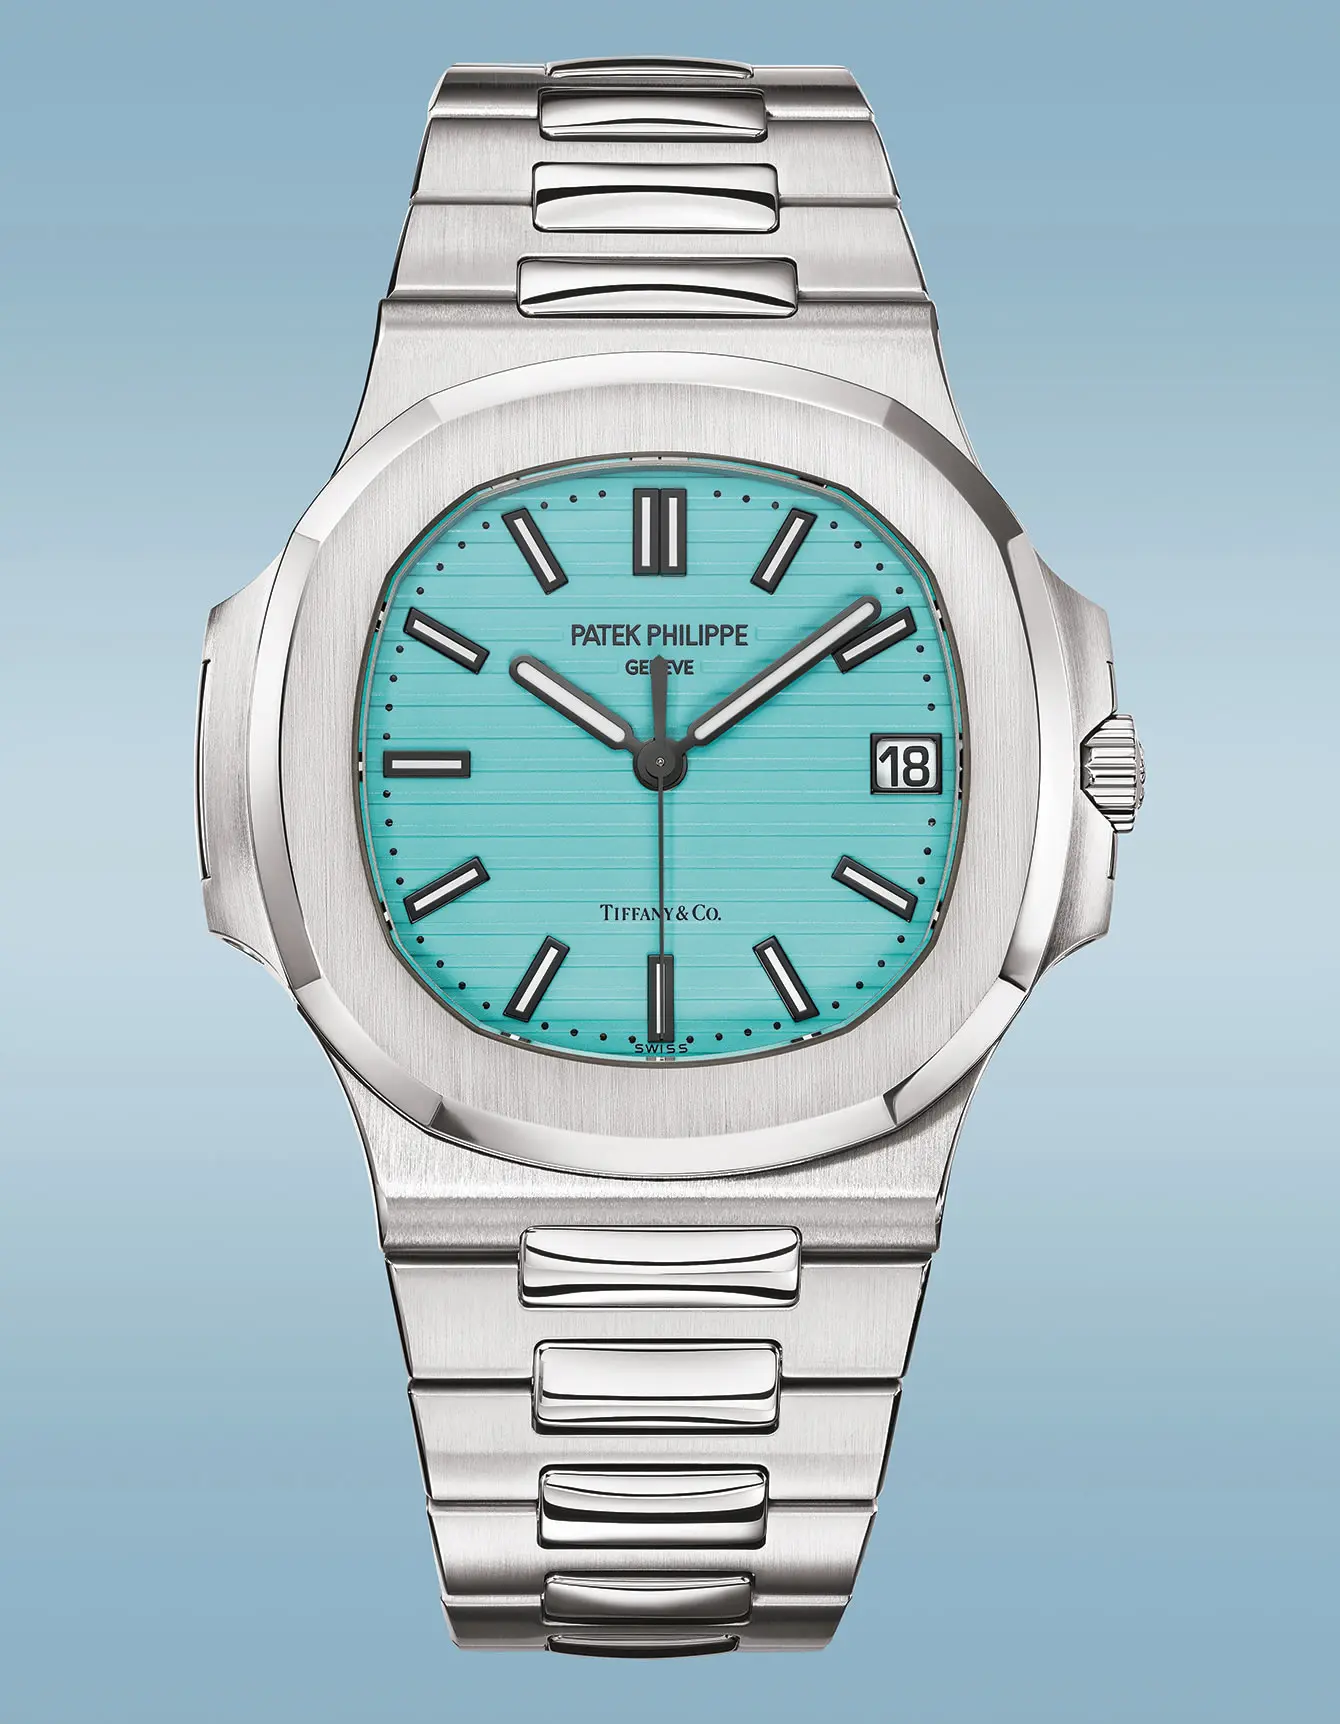 How Tiffany & Co. and Patek Philippe teamed up for the last-ever